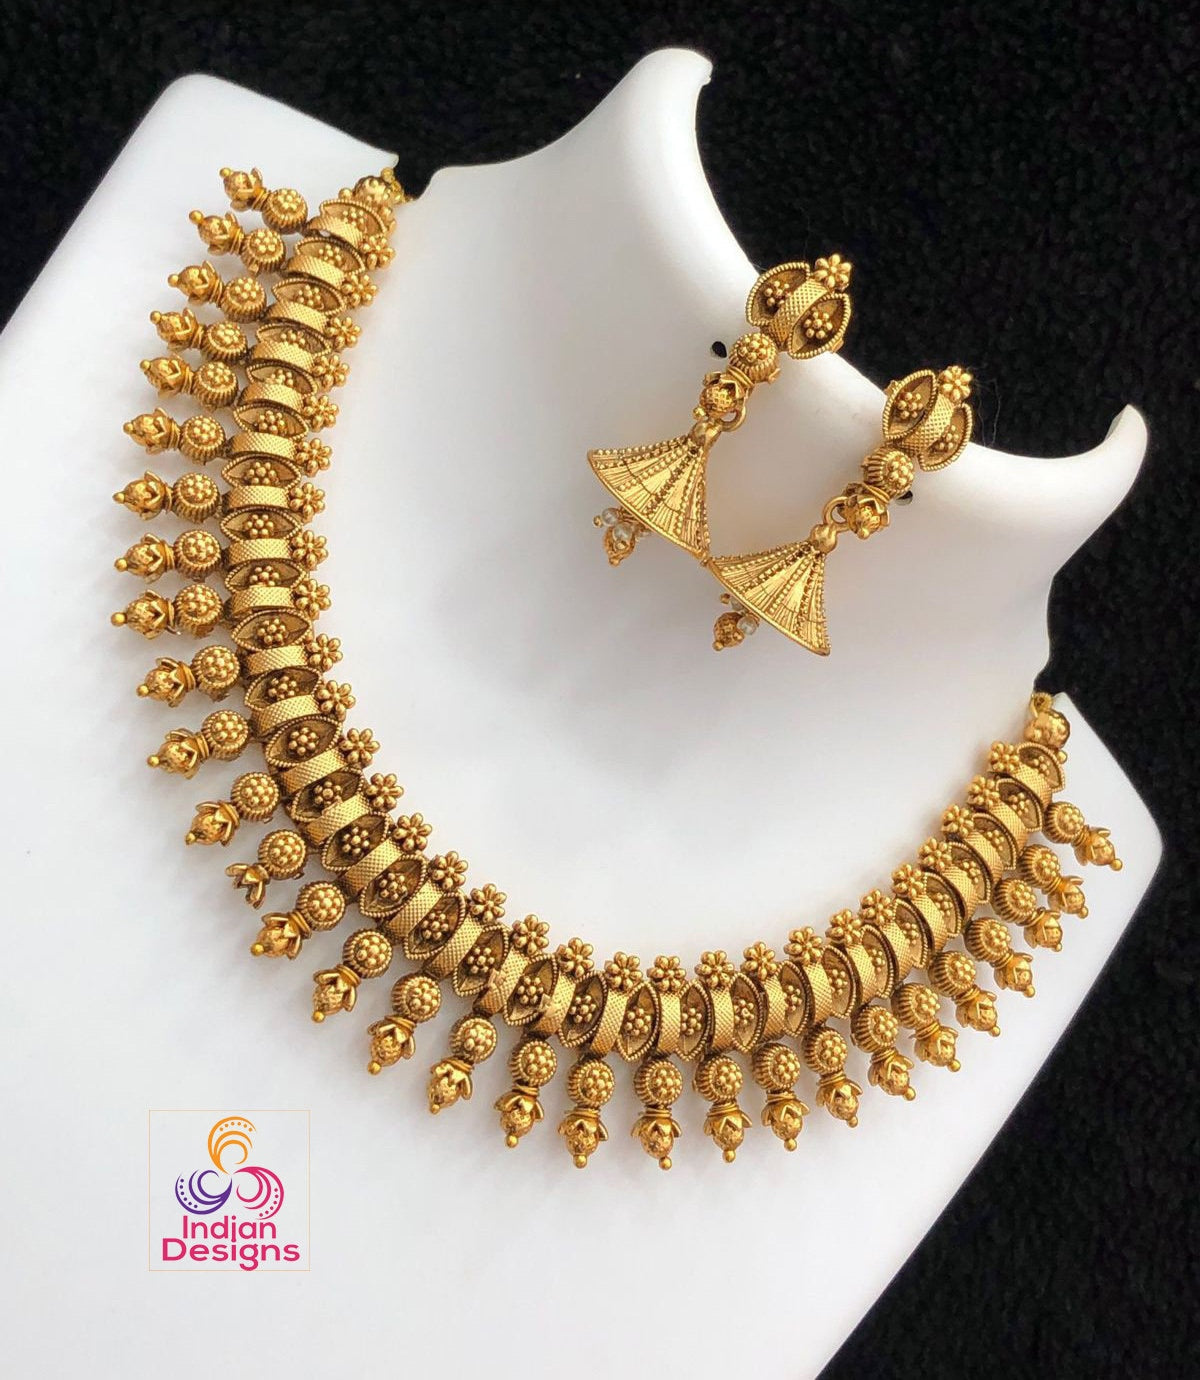 Traditional Indian Gold-Plated Necklace and Earrings Set|Antique Temple Jewelry| Ethnic Indian Bridal Wedding Jewelry Set||Gift for her